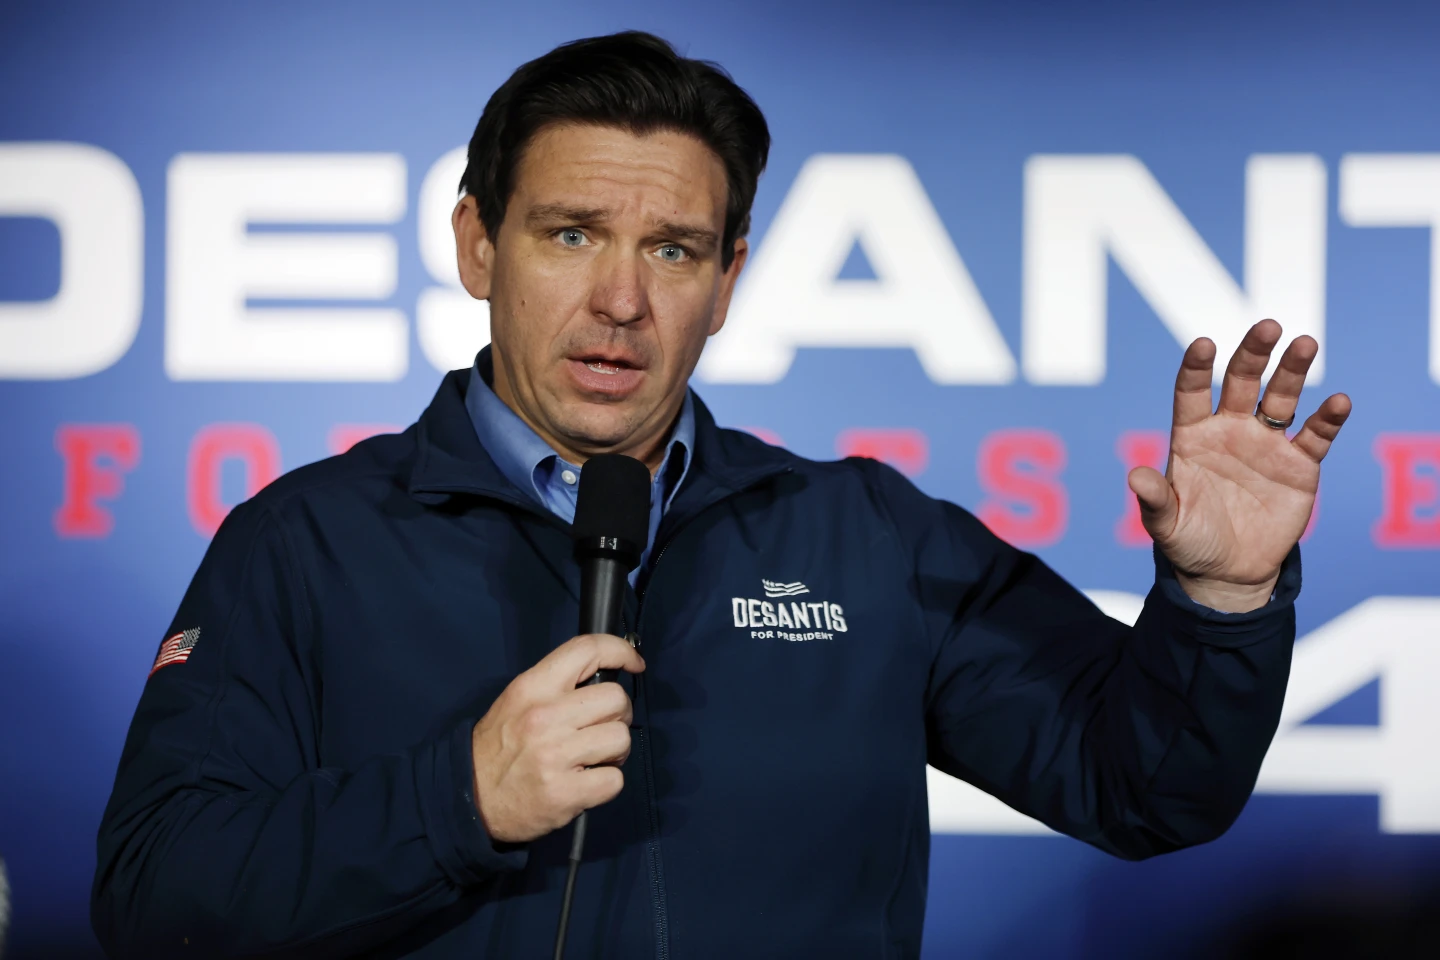 Another poll shows that Ron DeSantis would be a more popular choice for vice president than Byron Donalds and Marco Rubio